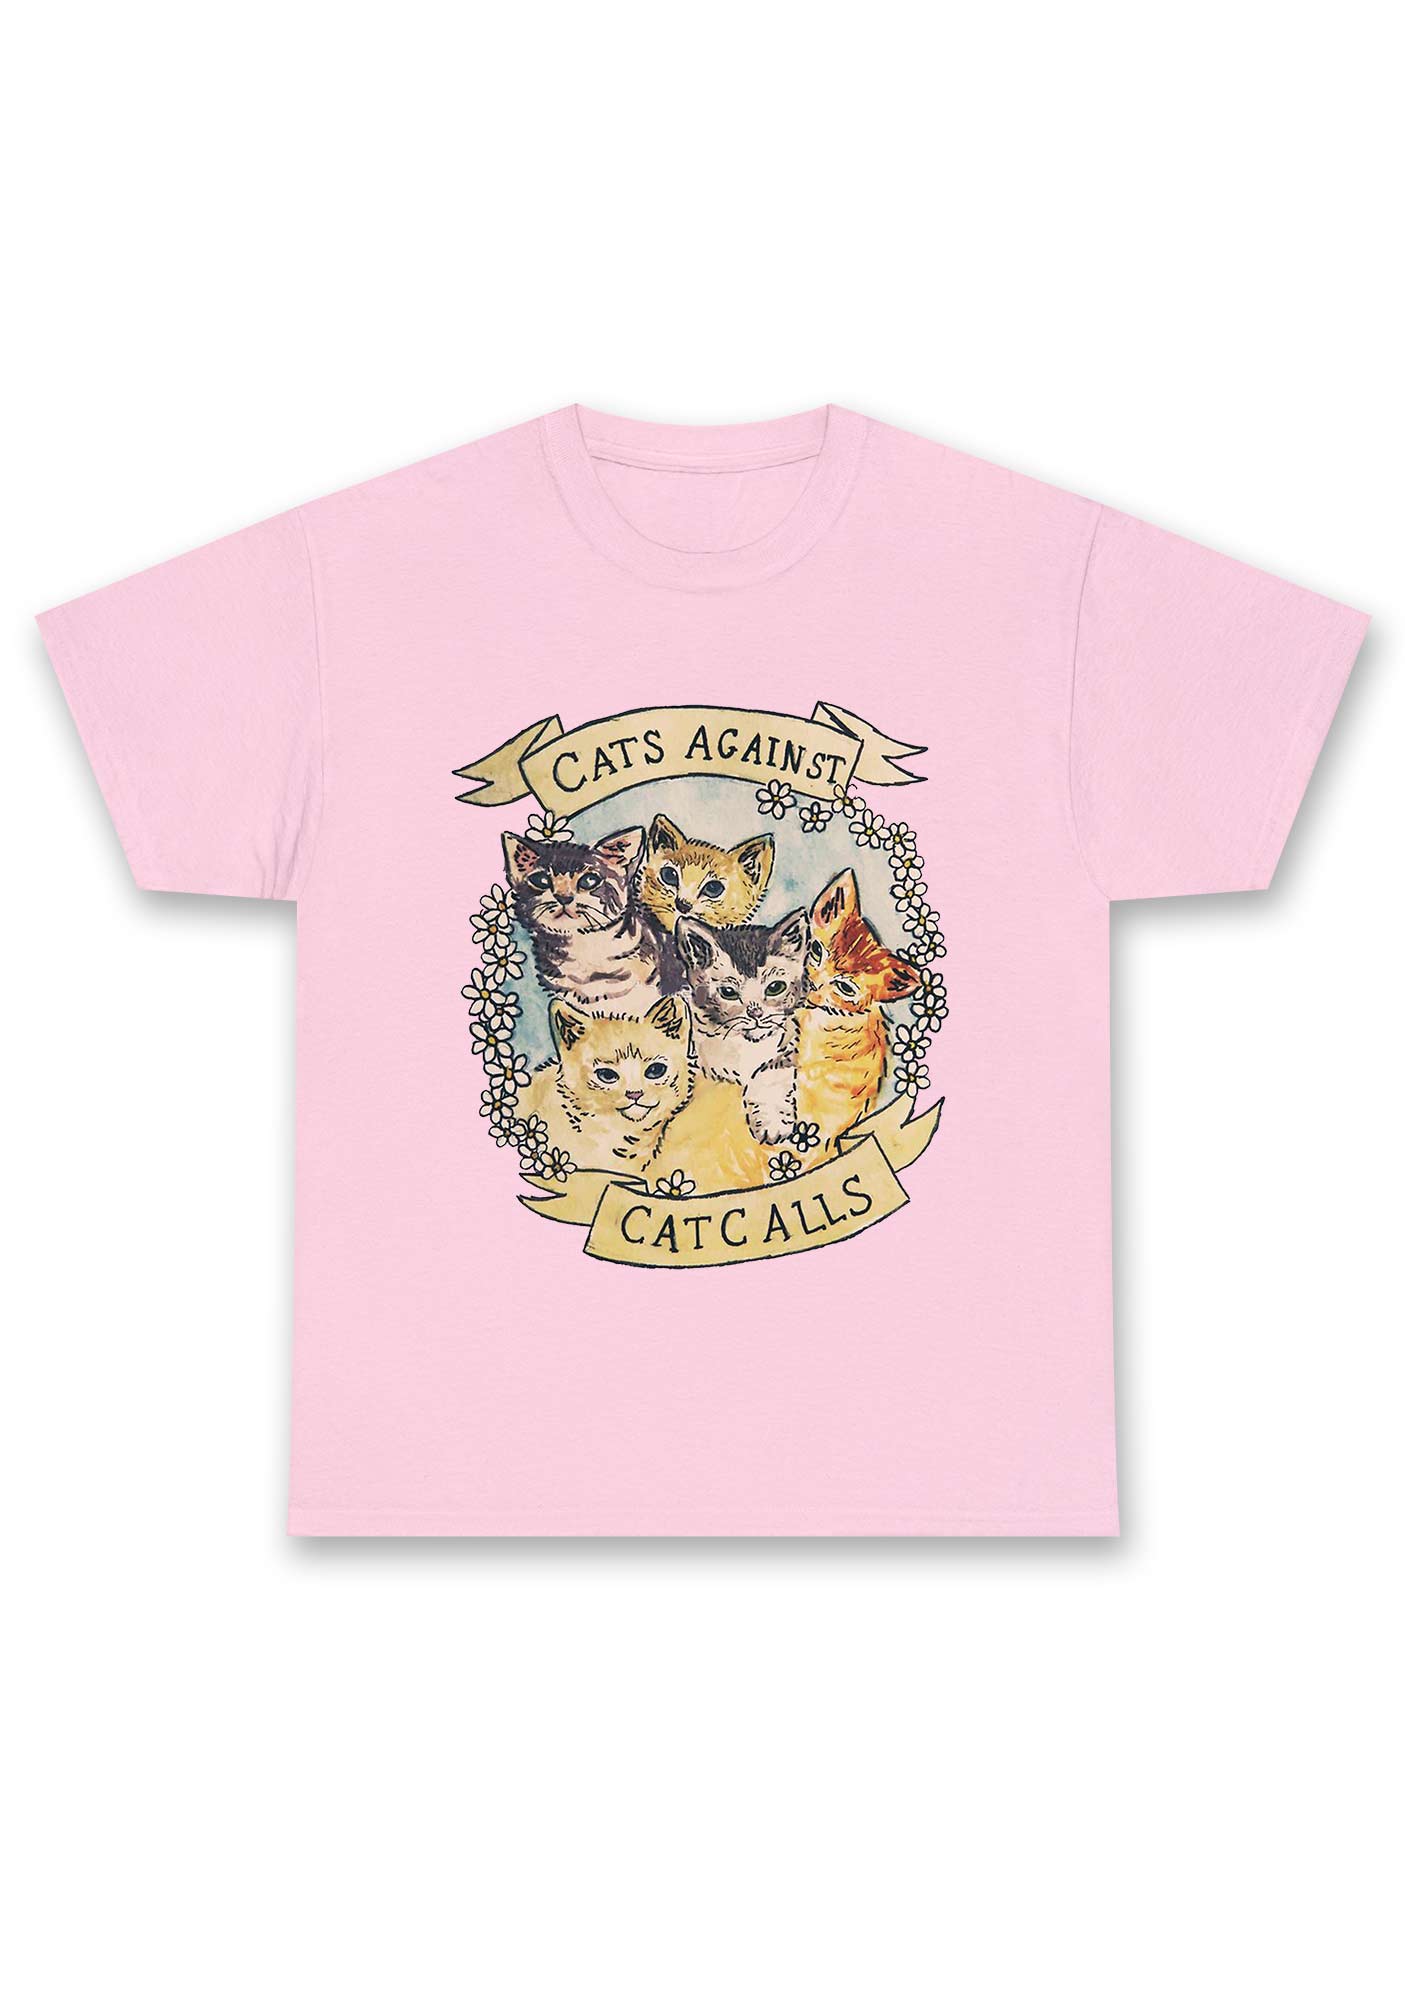 Cats Against Cat Calls Chunky Shirt